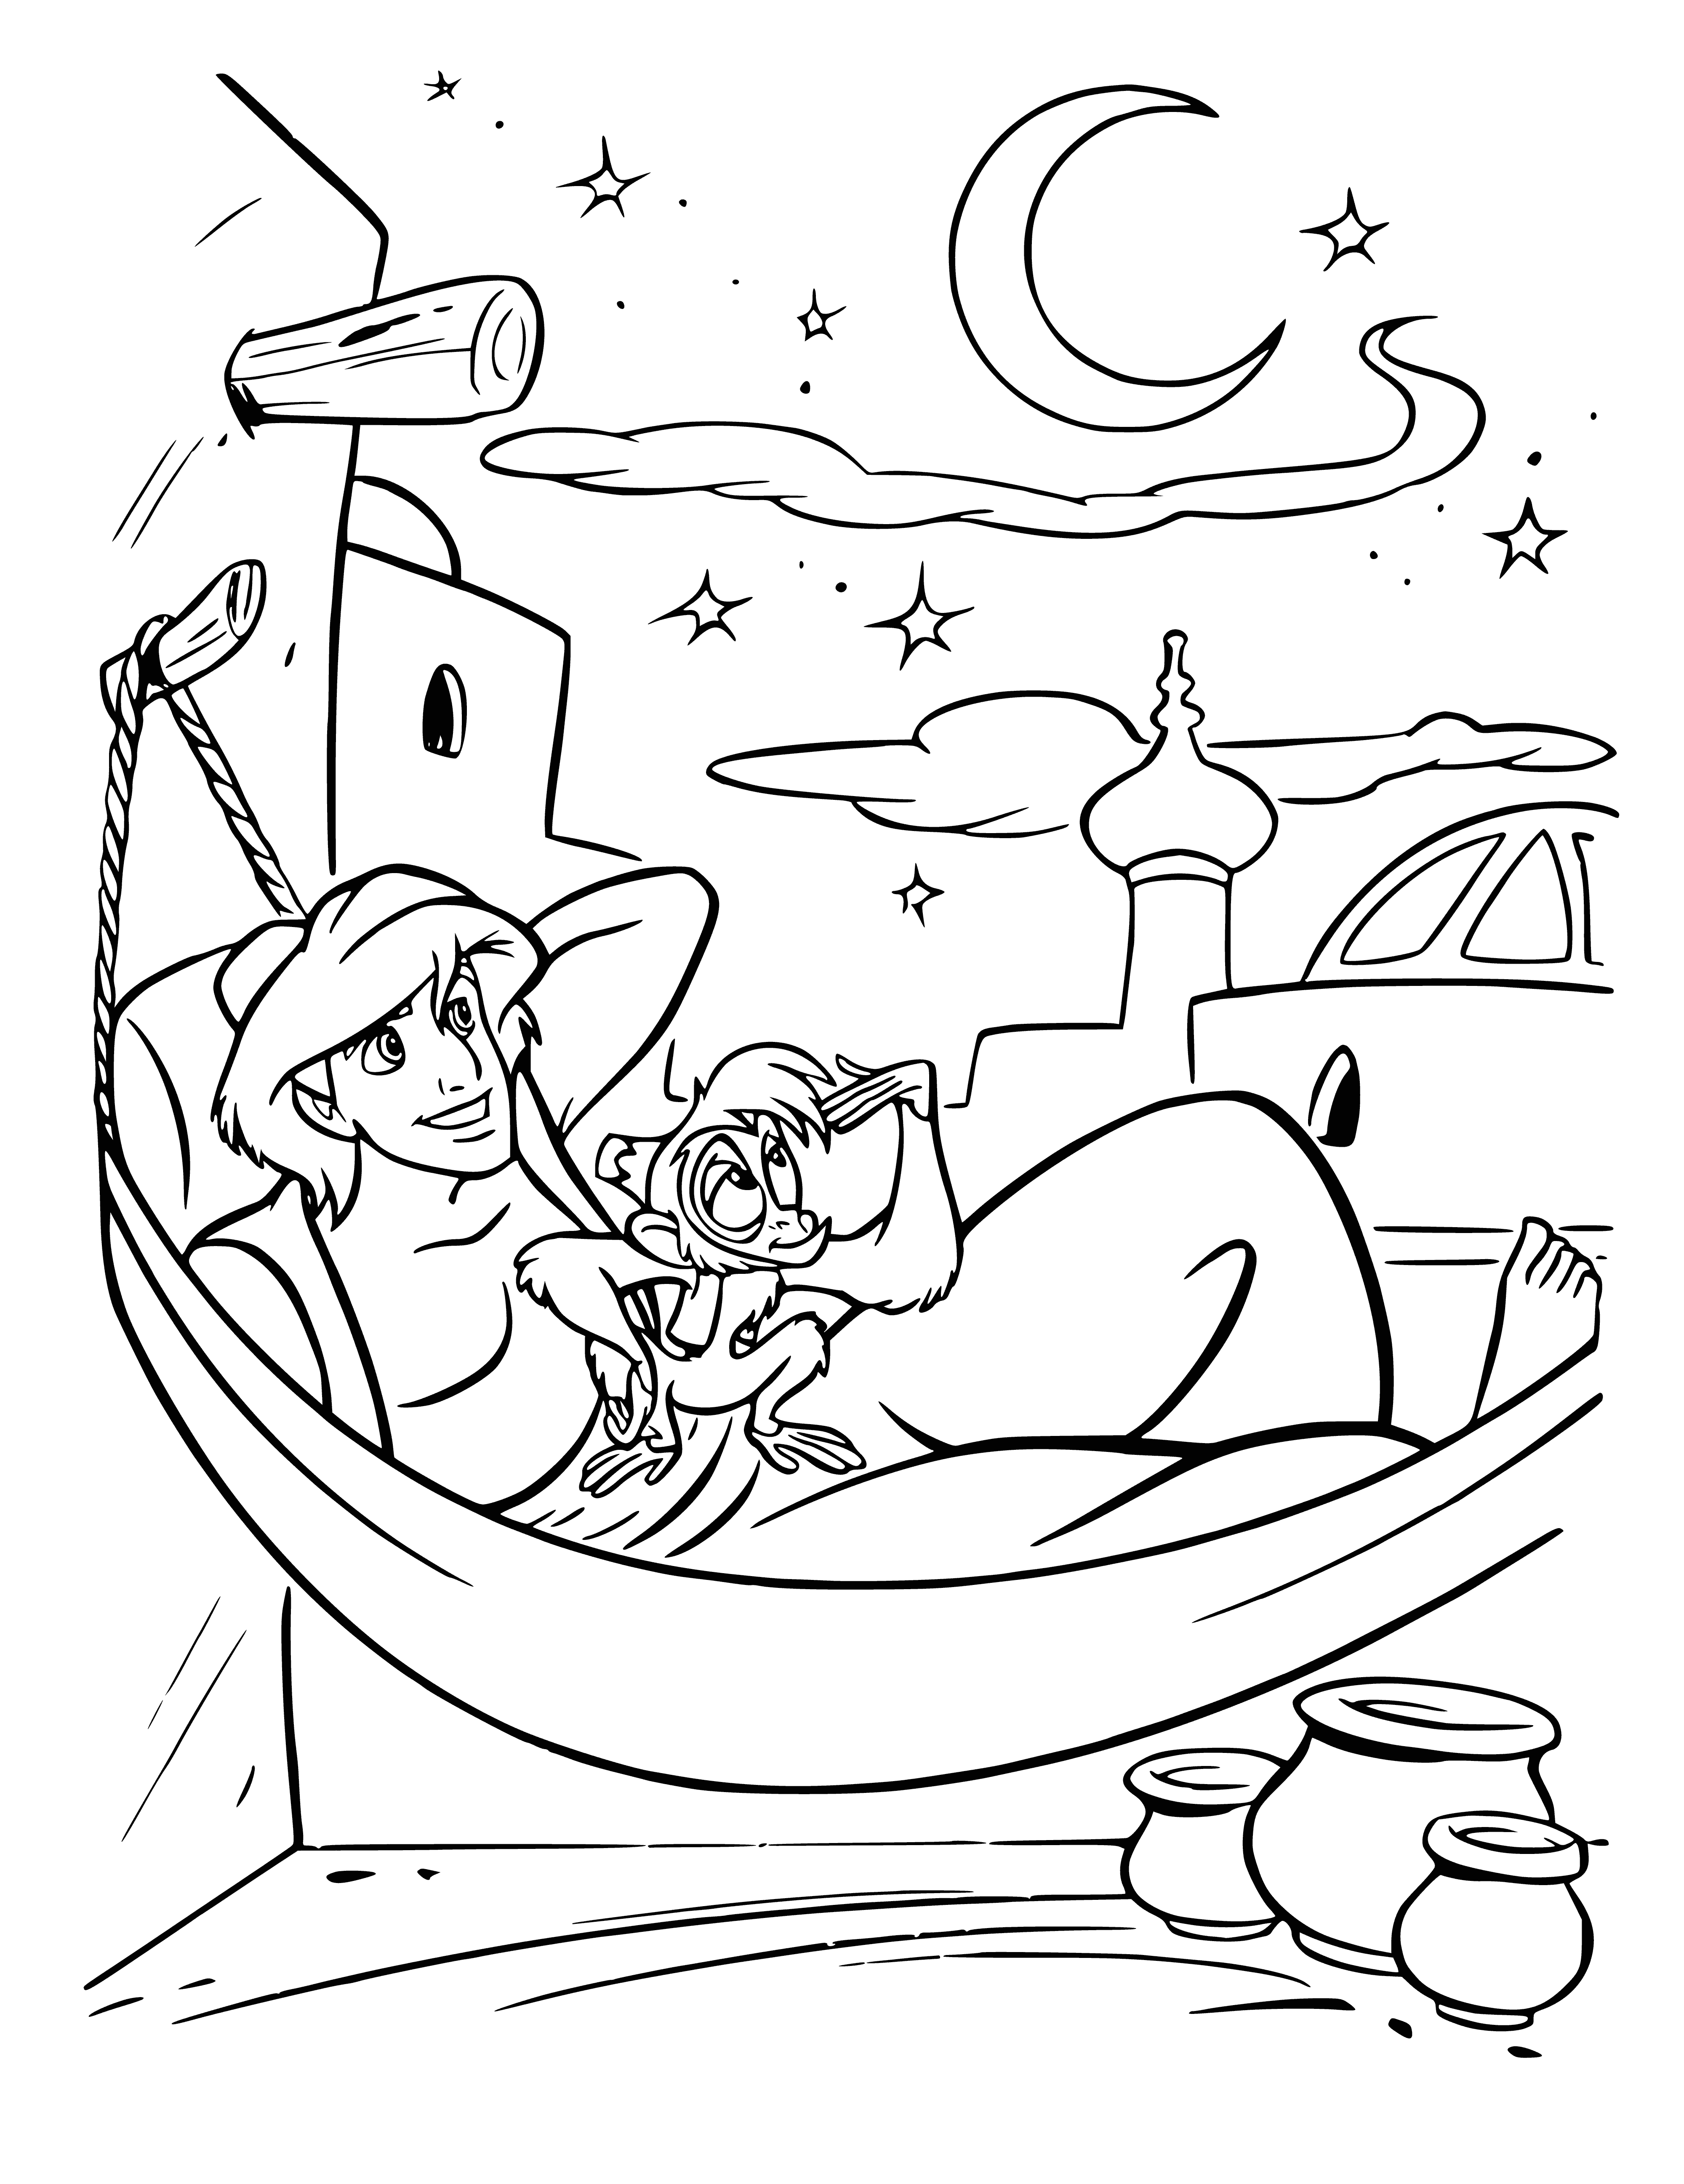 coloring page: Aladdin and Abu quarrel, Aladdin looking angry and waving his arms. Abu cowers anxiously.